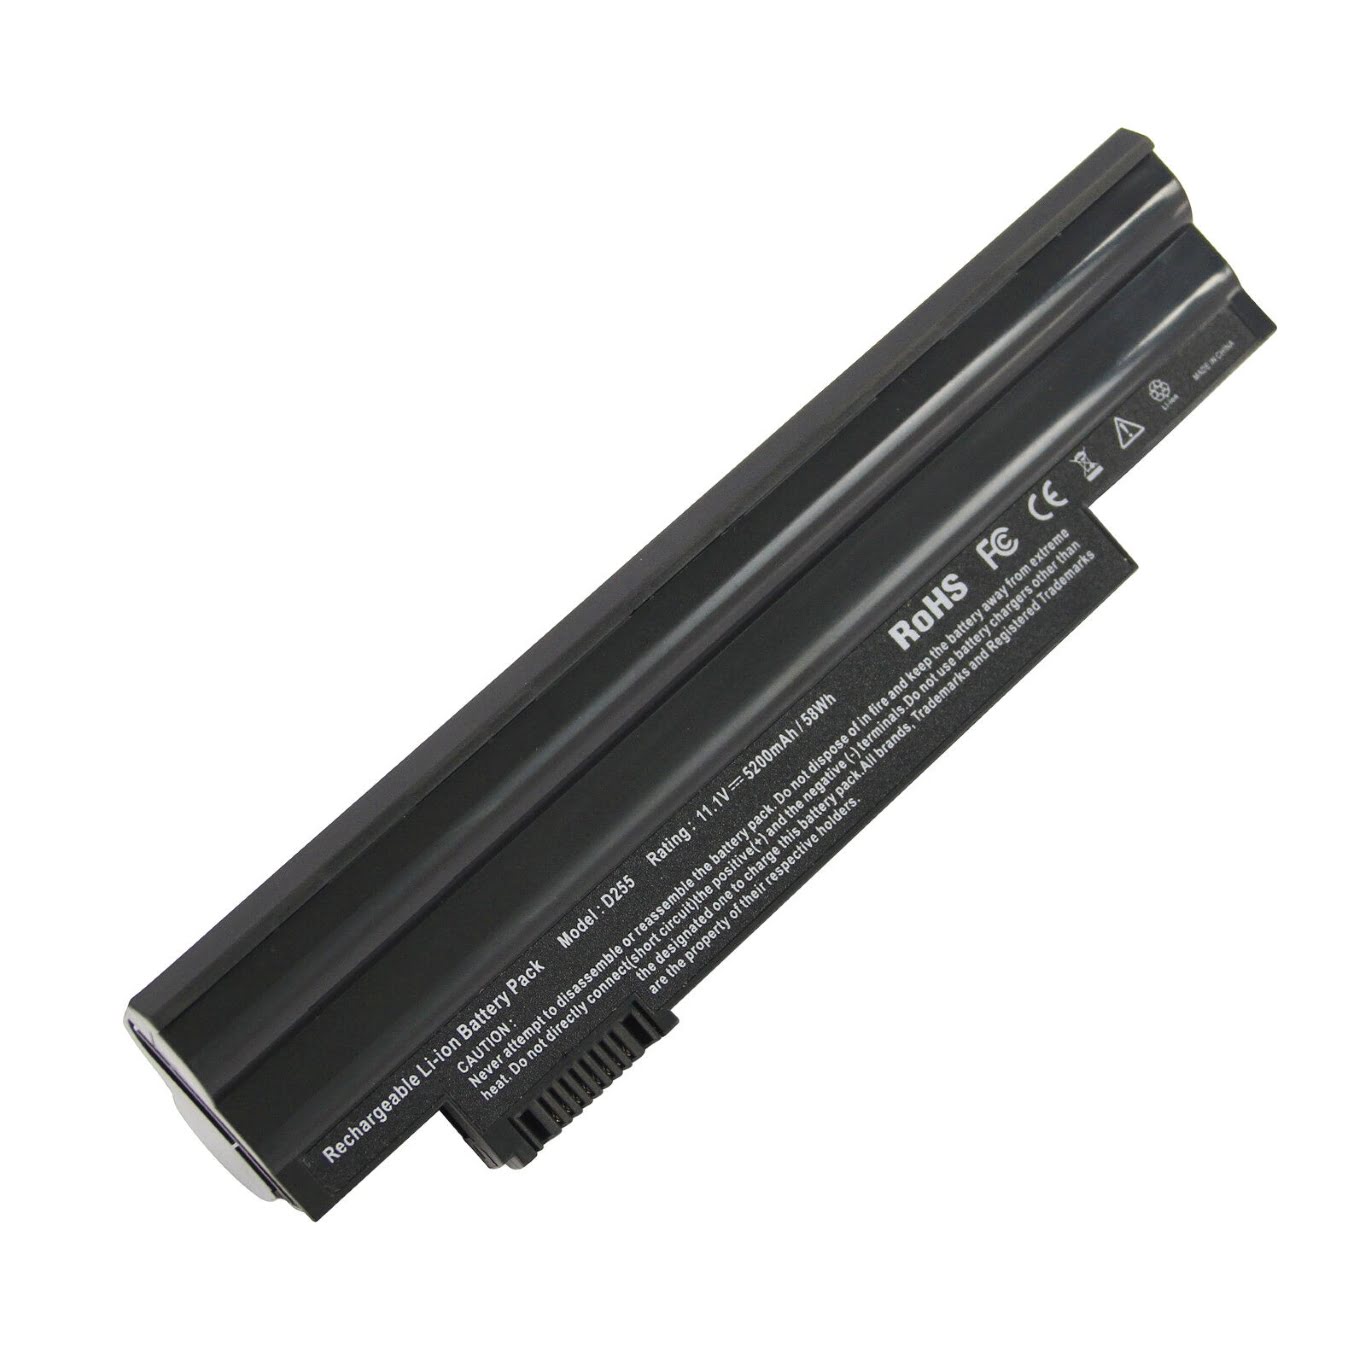 Acer Ak.003bt.071, Ak.006bt.074 Laptop Batteries For Aspire One 360 (d260), Aspire One 522 replacement